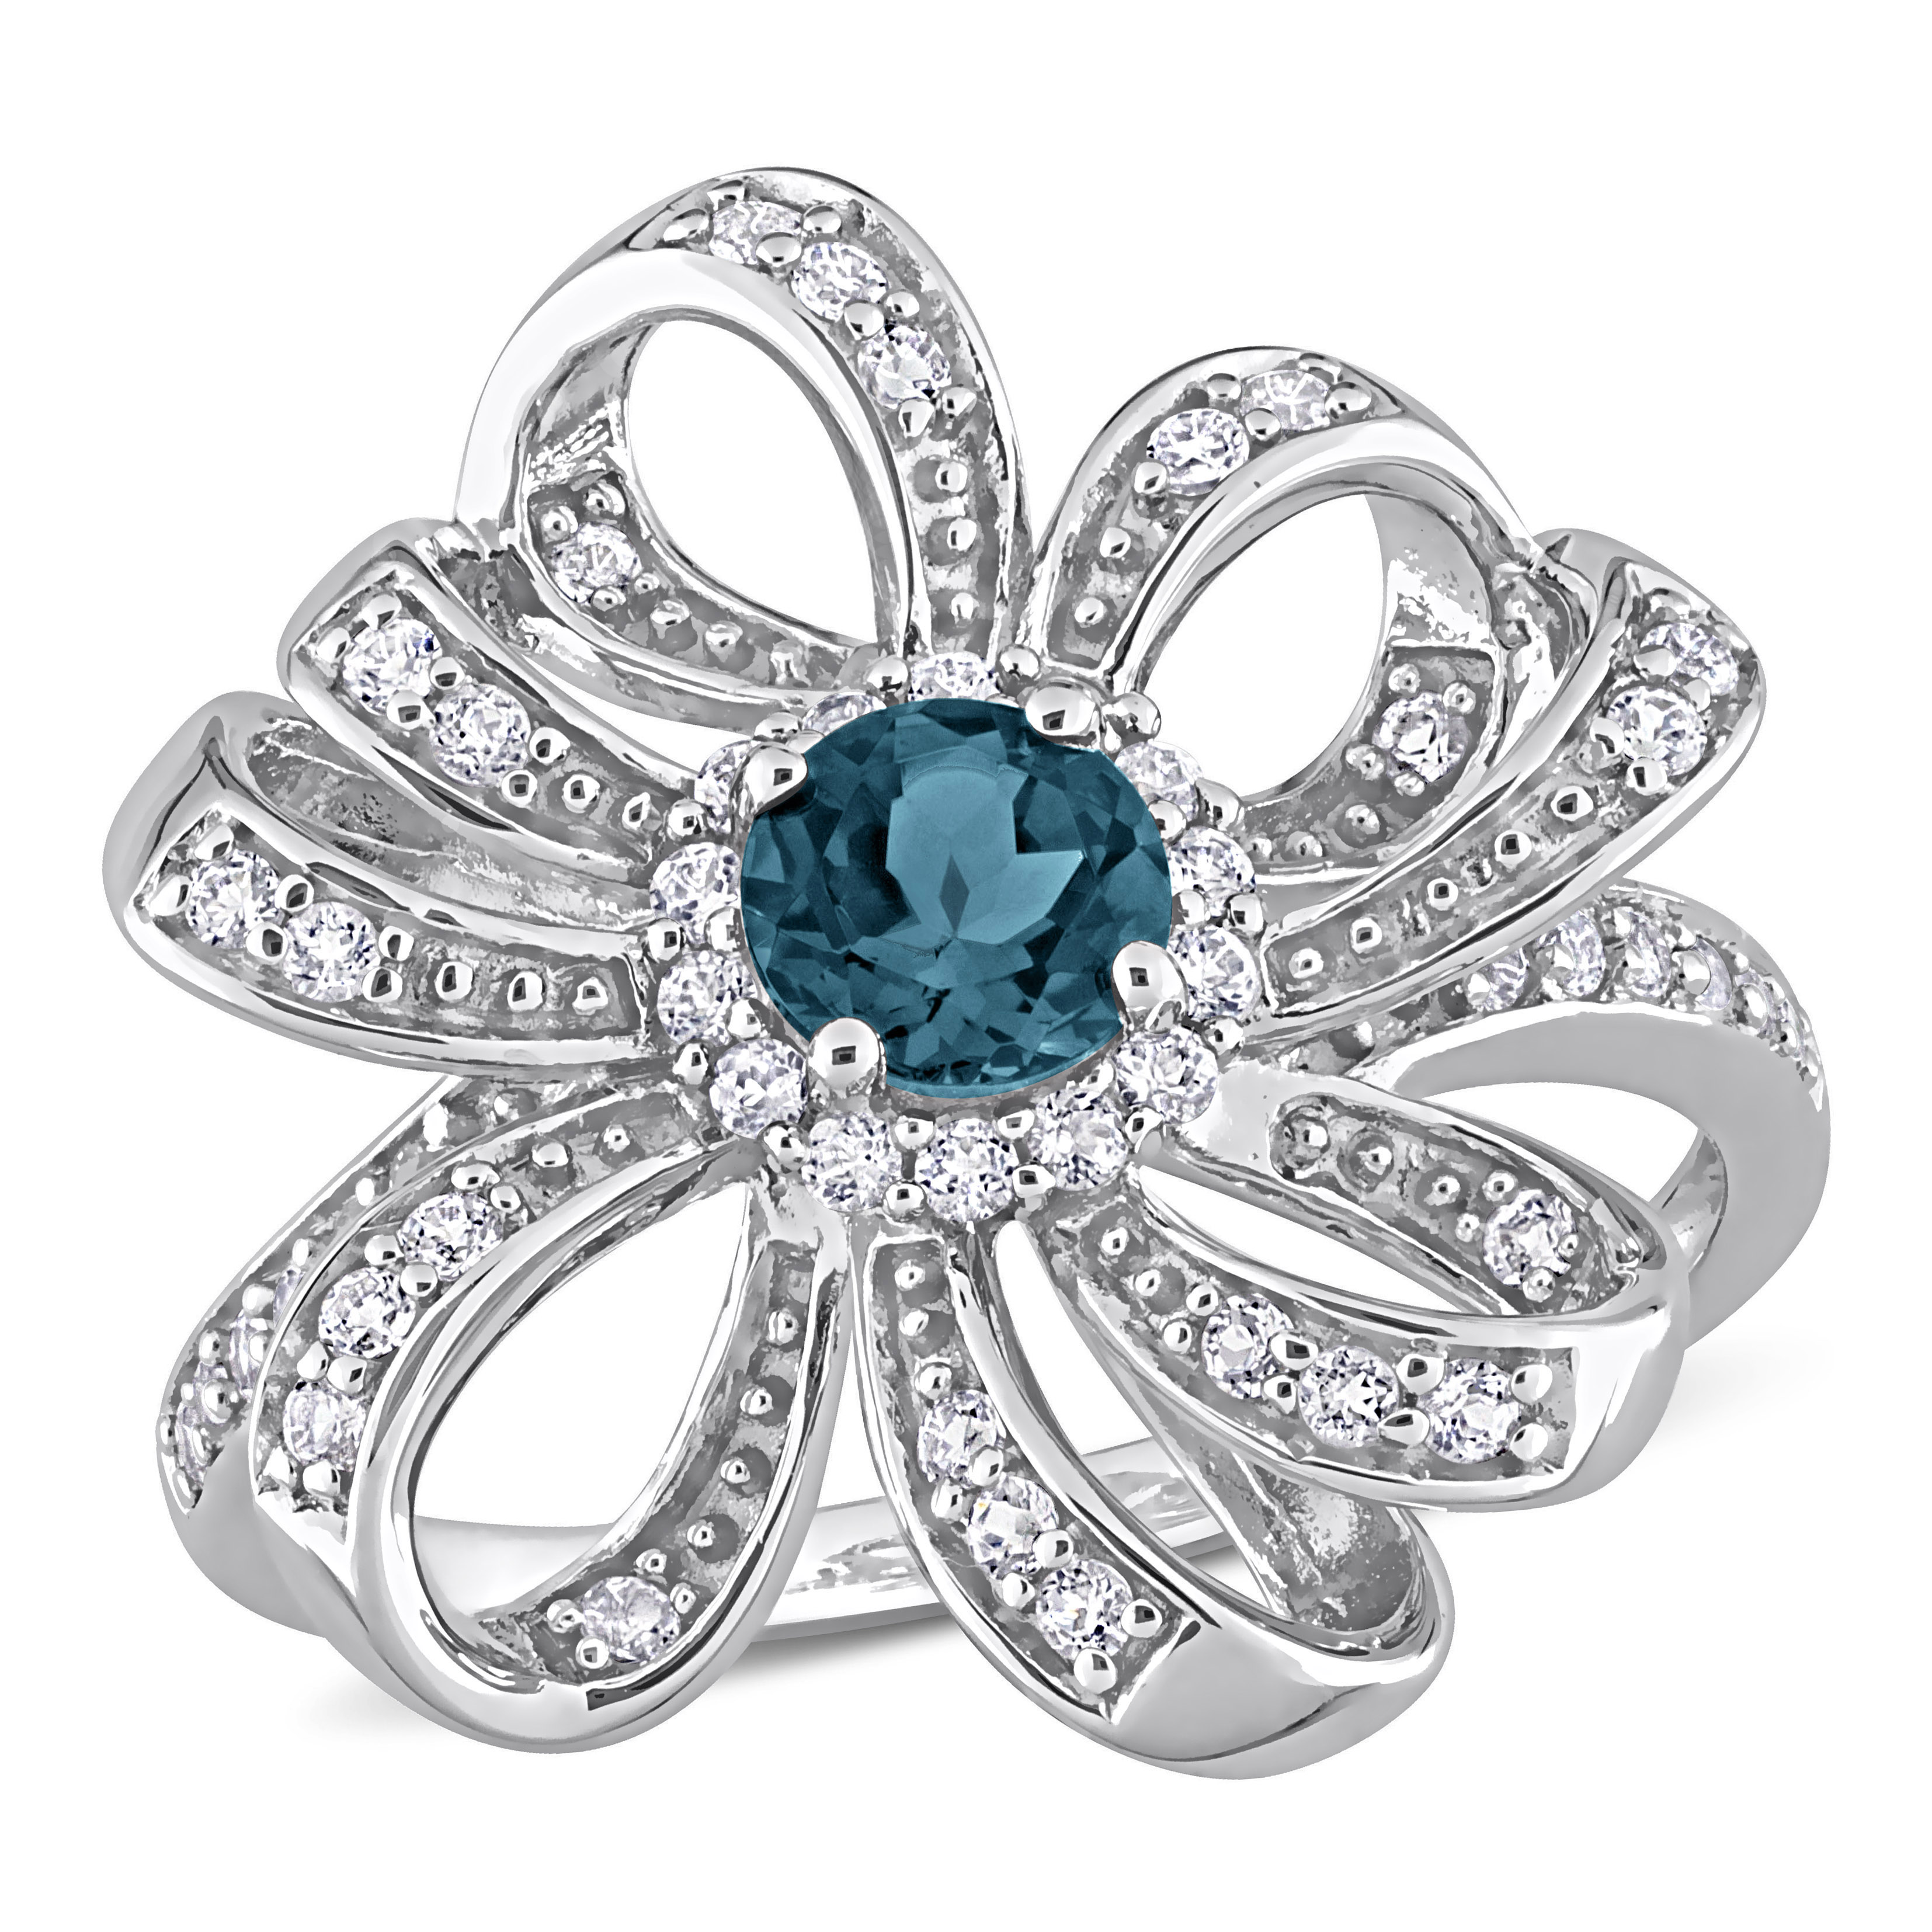 1 CT TGW London Blue Topaz and White Topaz Flower Cocktail Ring in Sterling Silver